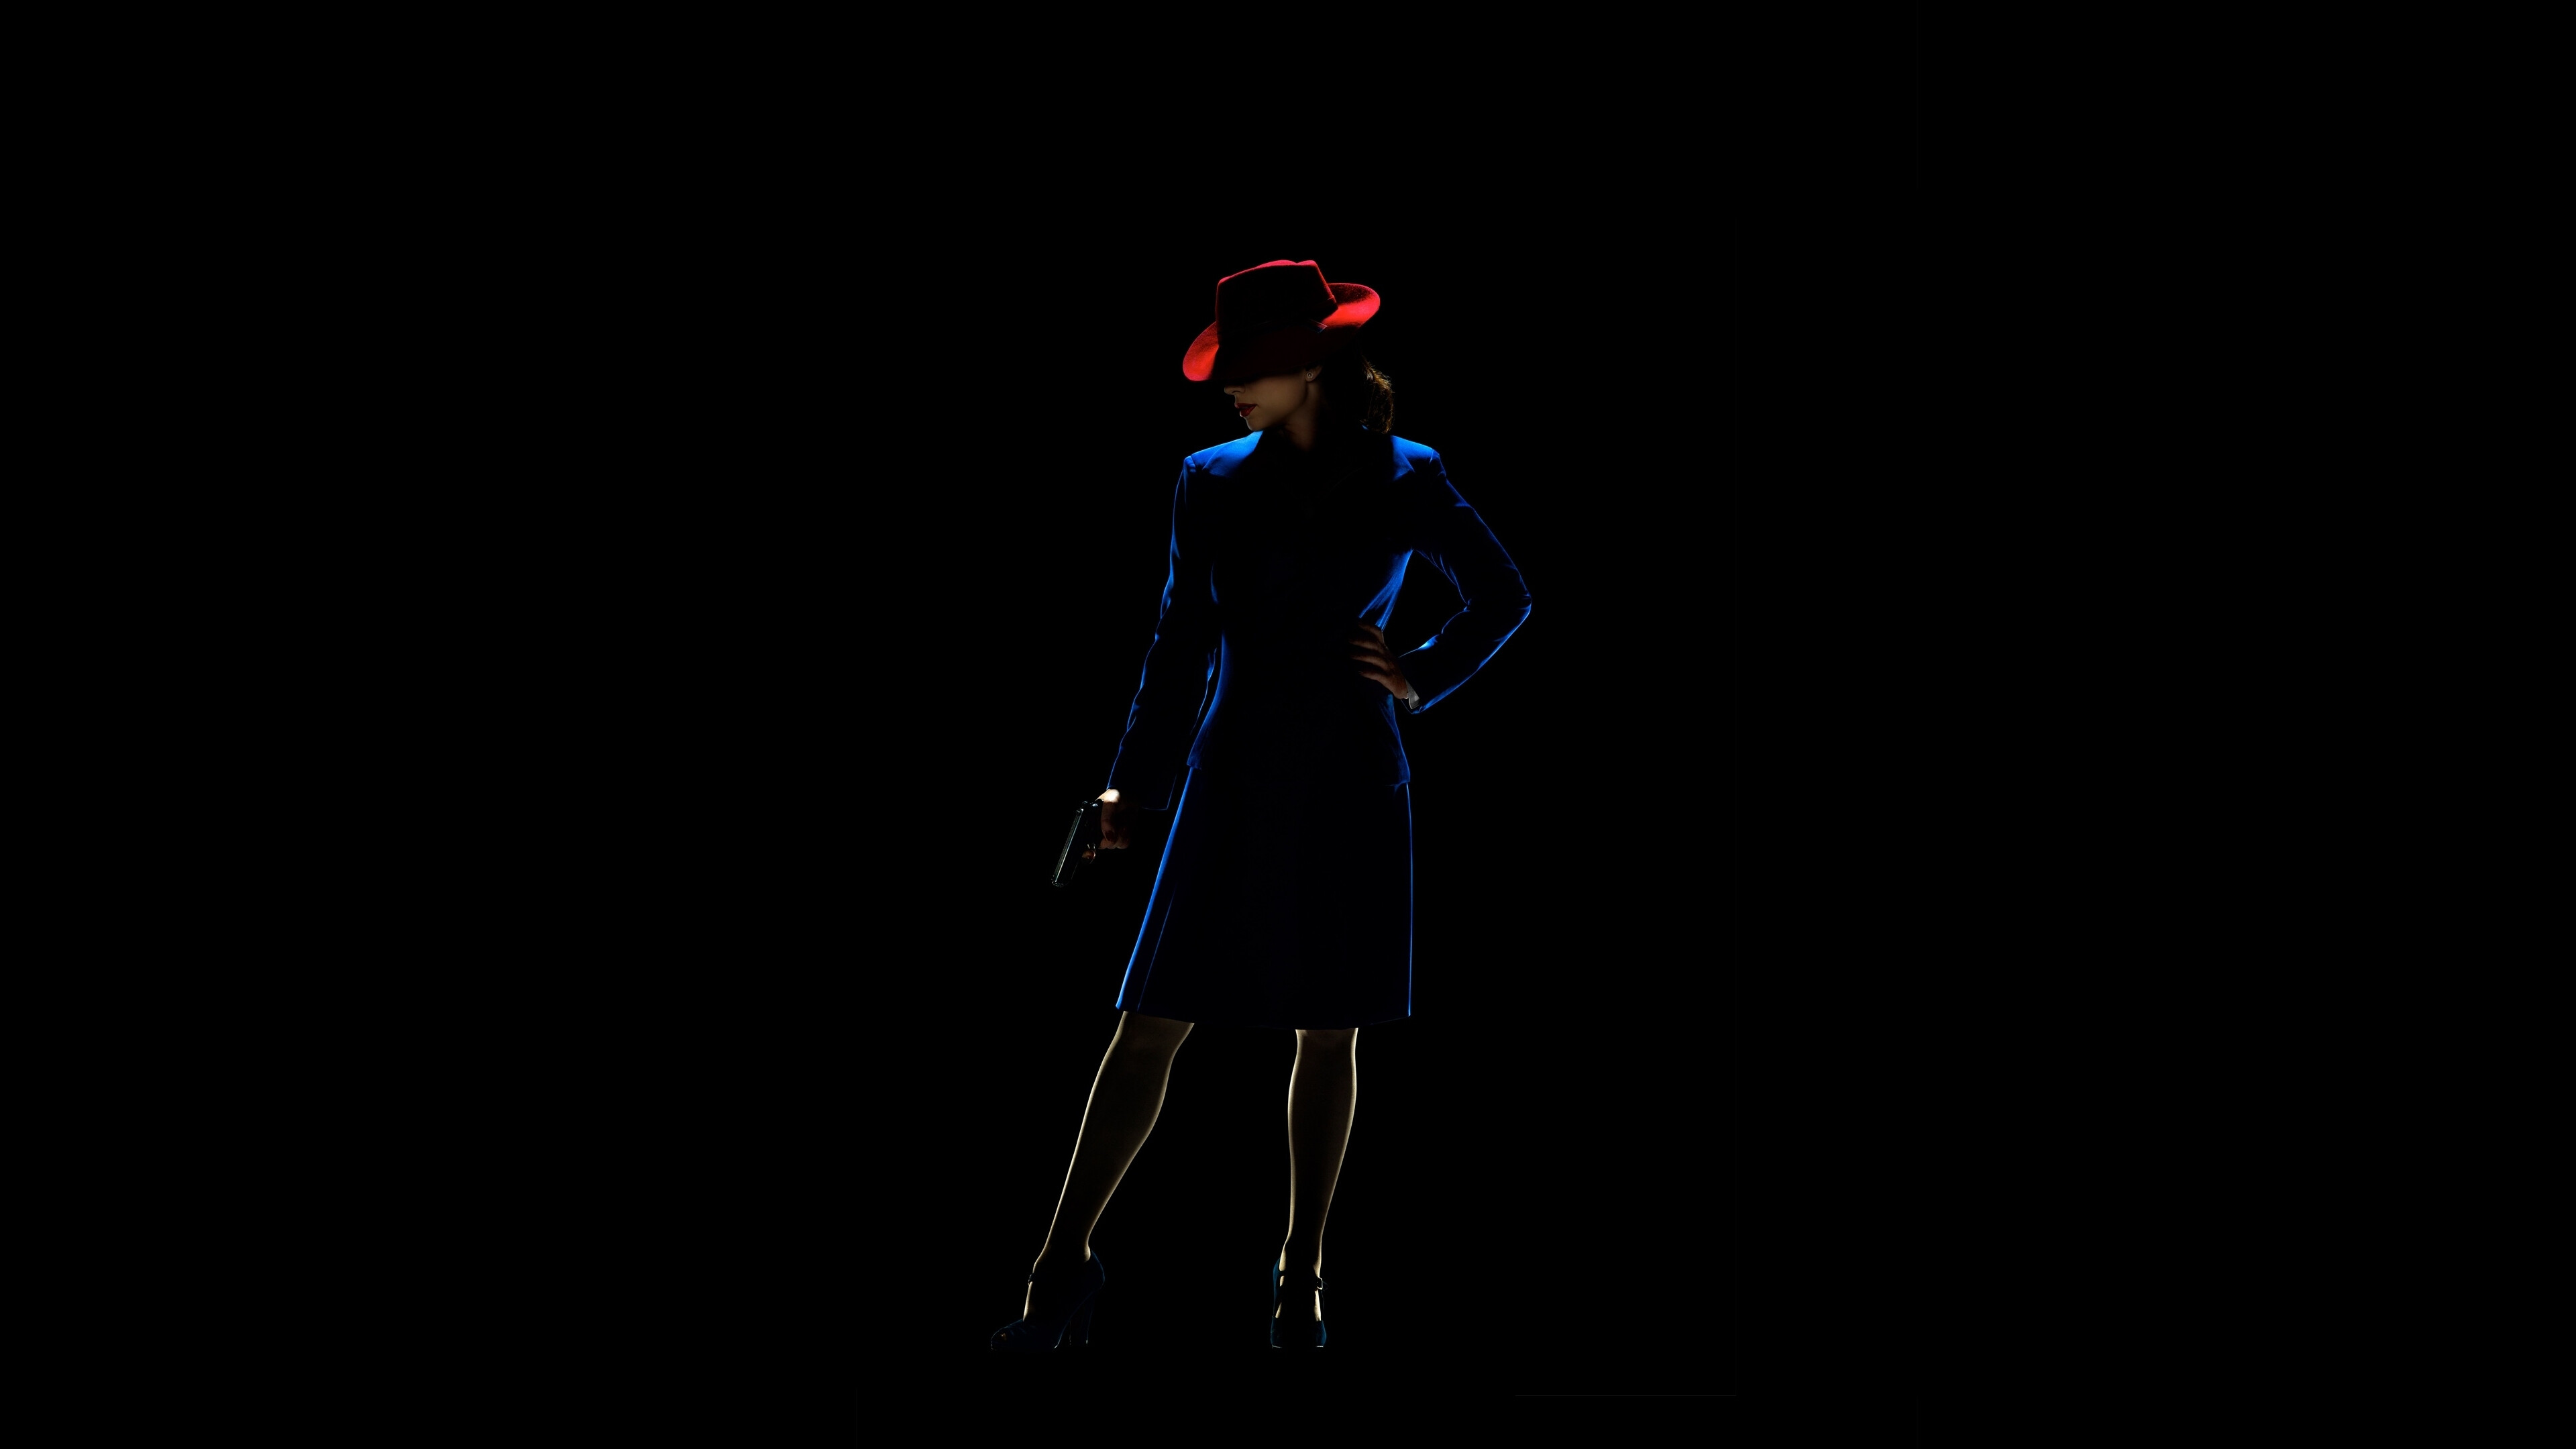 Hayley Atwell: Agent Carter, Dark, Silhouette, An American television series, Peggy Carter. 3840x2160 4K Background.